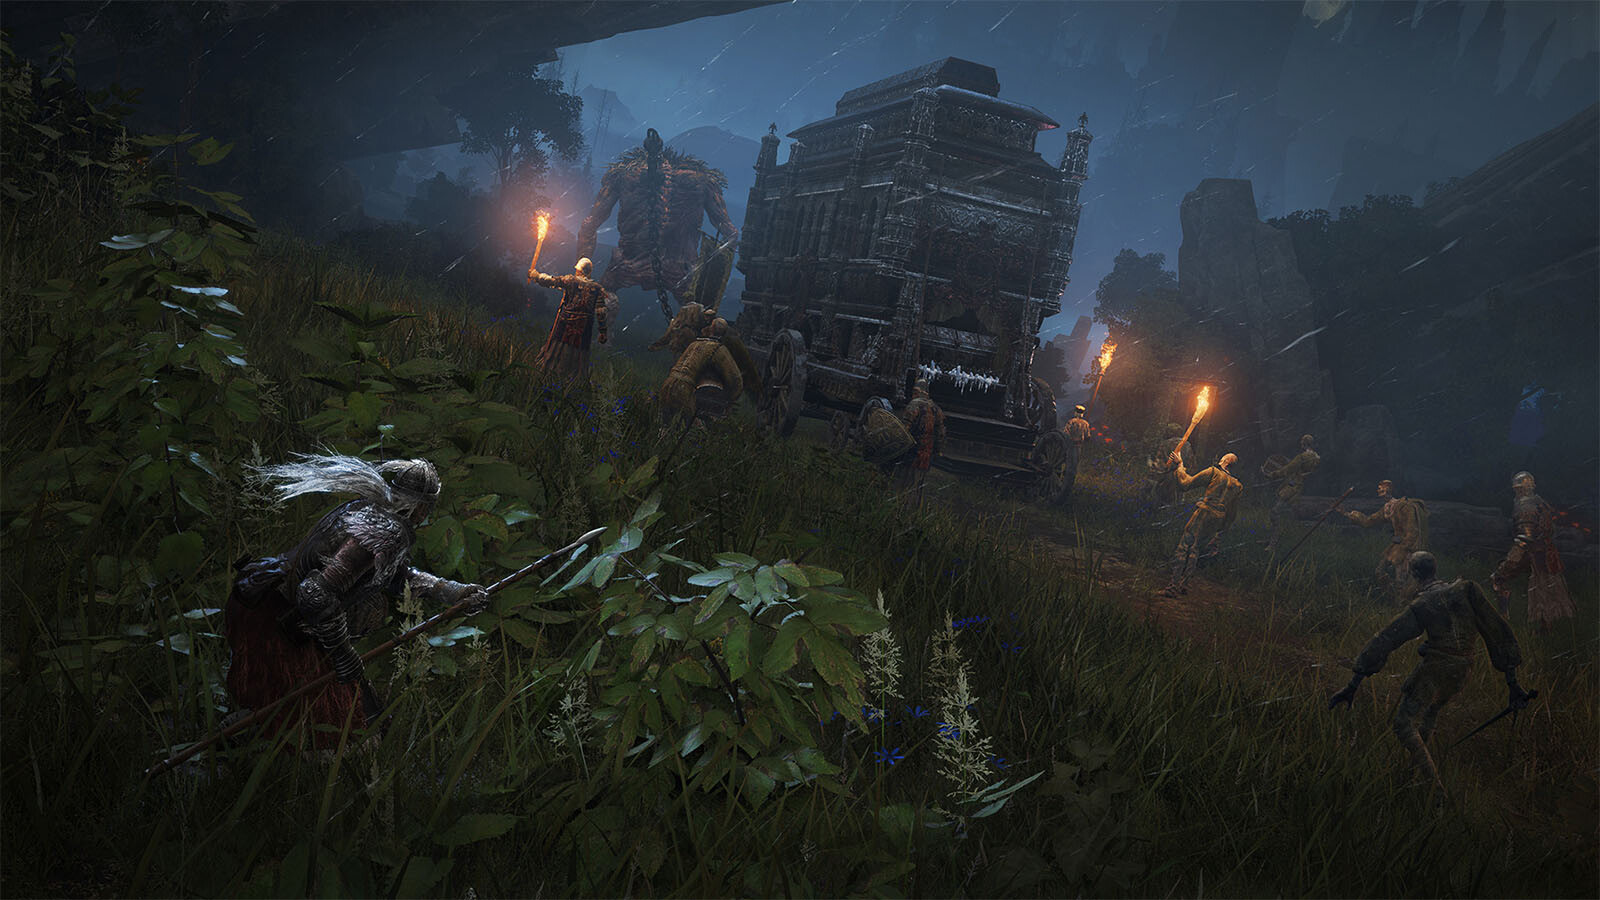 An image of a warrior hiding in the grass, while a troop of enemy knights and monsters pulls a cart nearby.